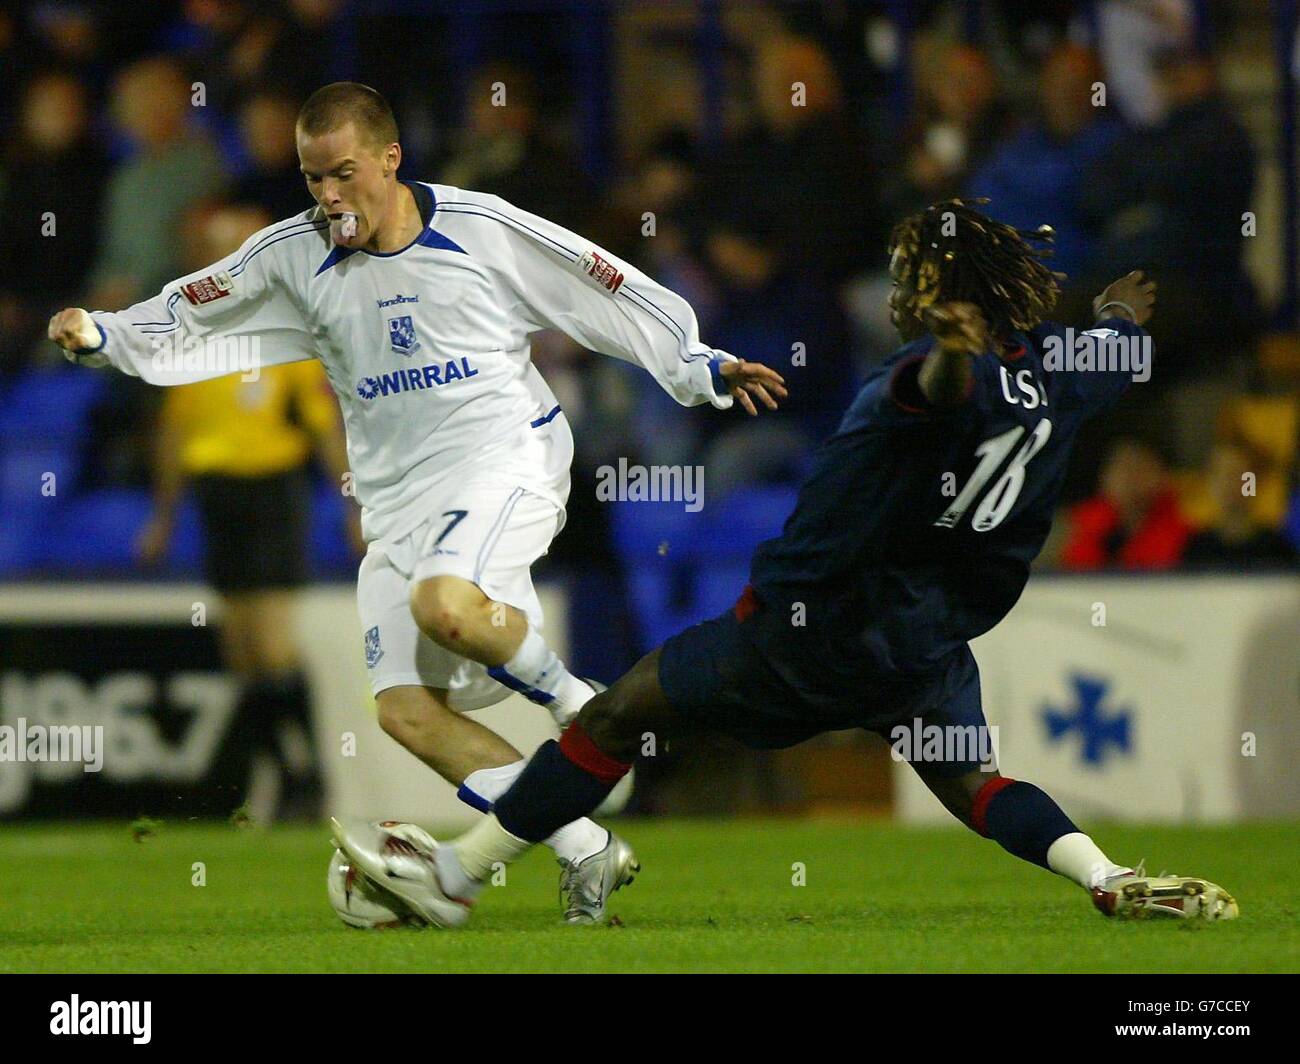 Tranmere Rovers' Iain Hume (left) battles with Portsmouth's Aliou Cisse during their Carling Cup second round match at Prenton Park, Birkenhead. Stock Photo